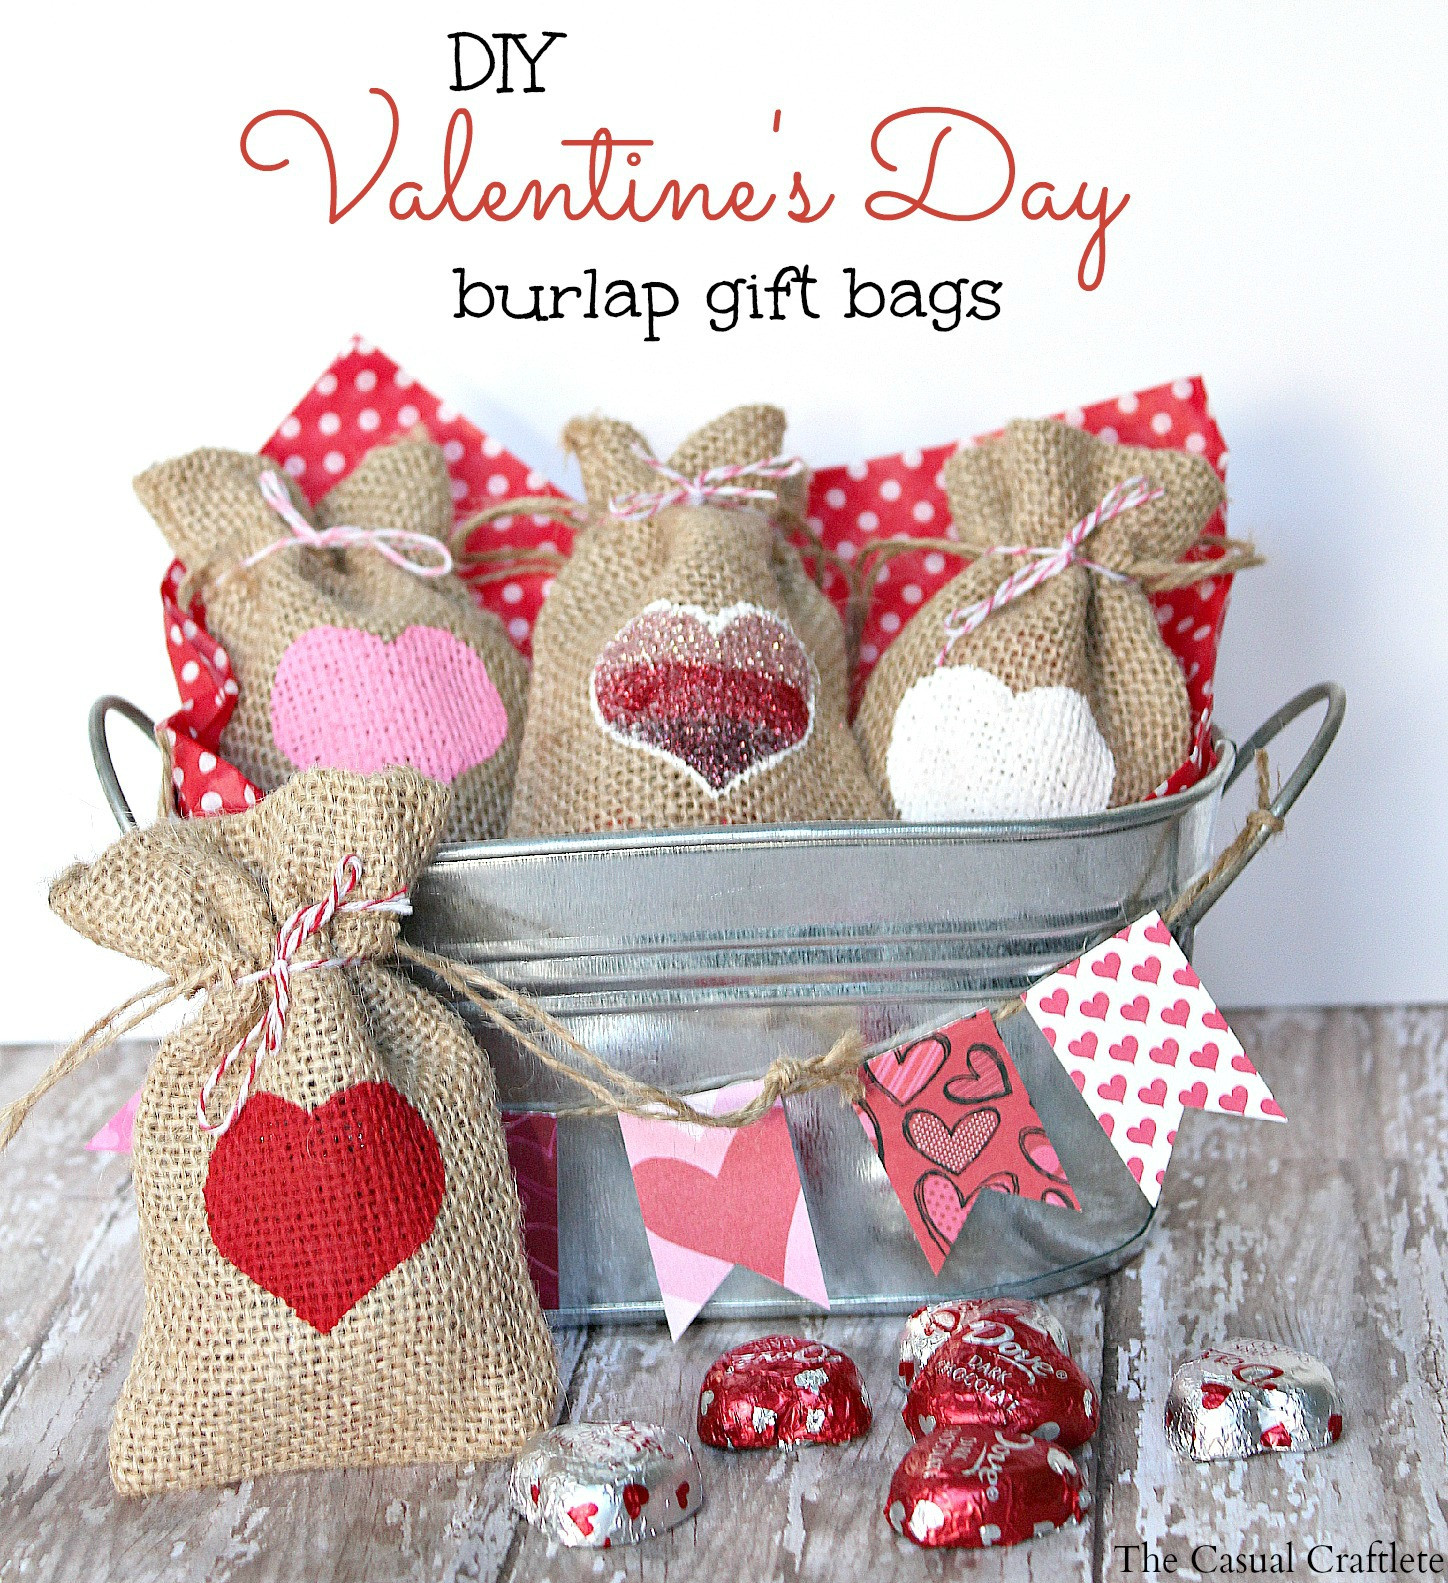 Cute Valentines Gift Ideas
 DIY Valentine s Day Burlap Gift Bags